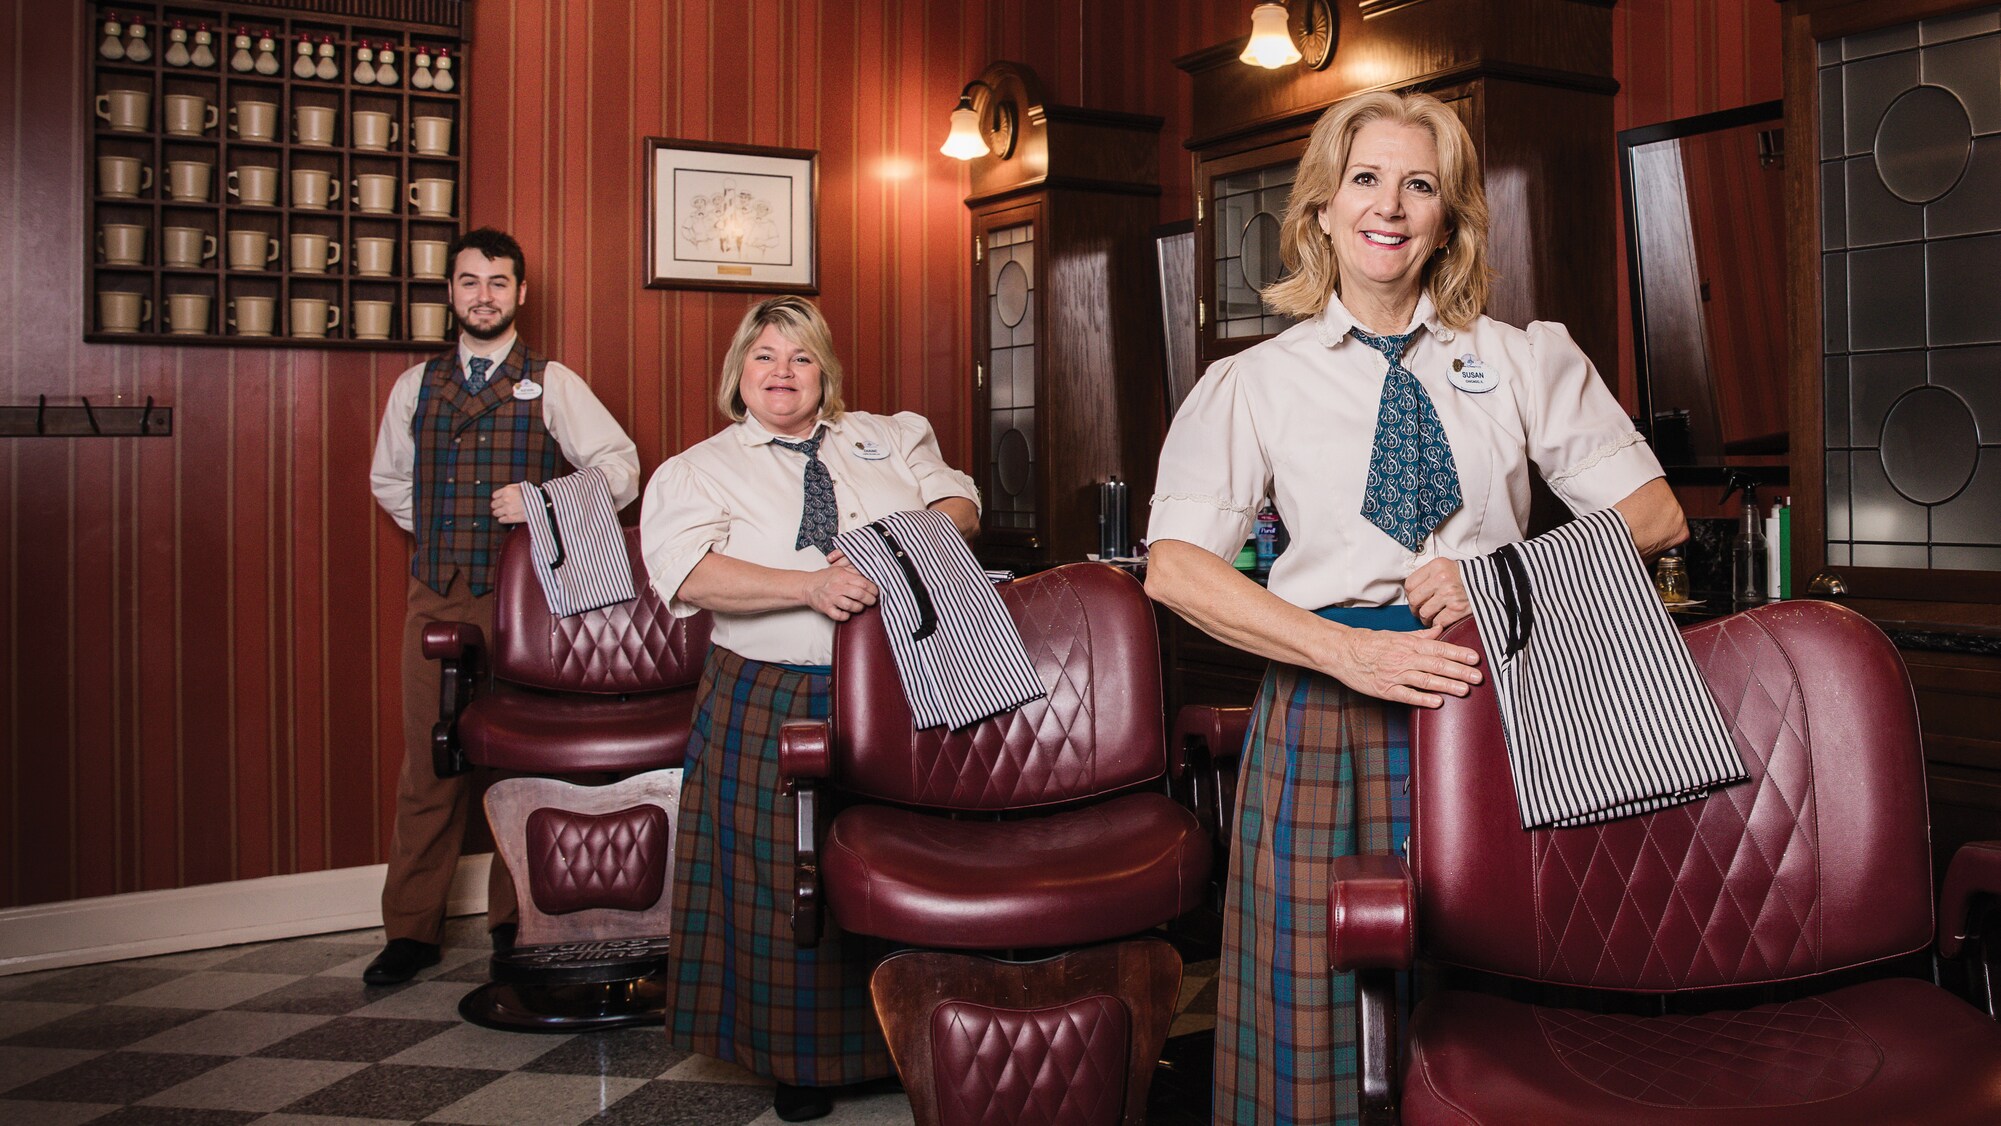 Pricing and services for the soon-to-reopen Magic Kingdom Harmony Barber Shop